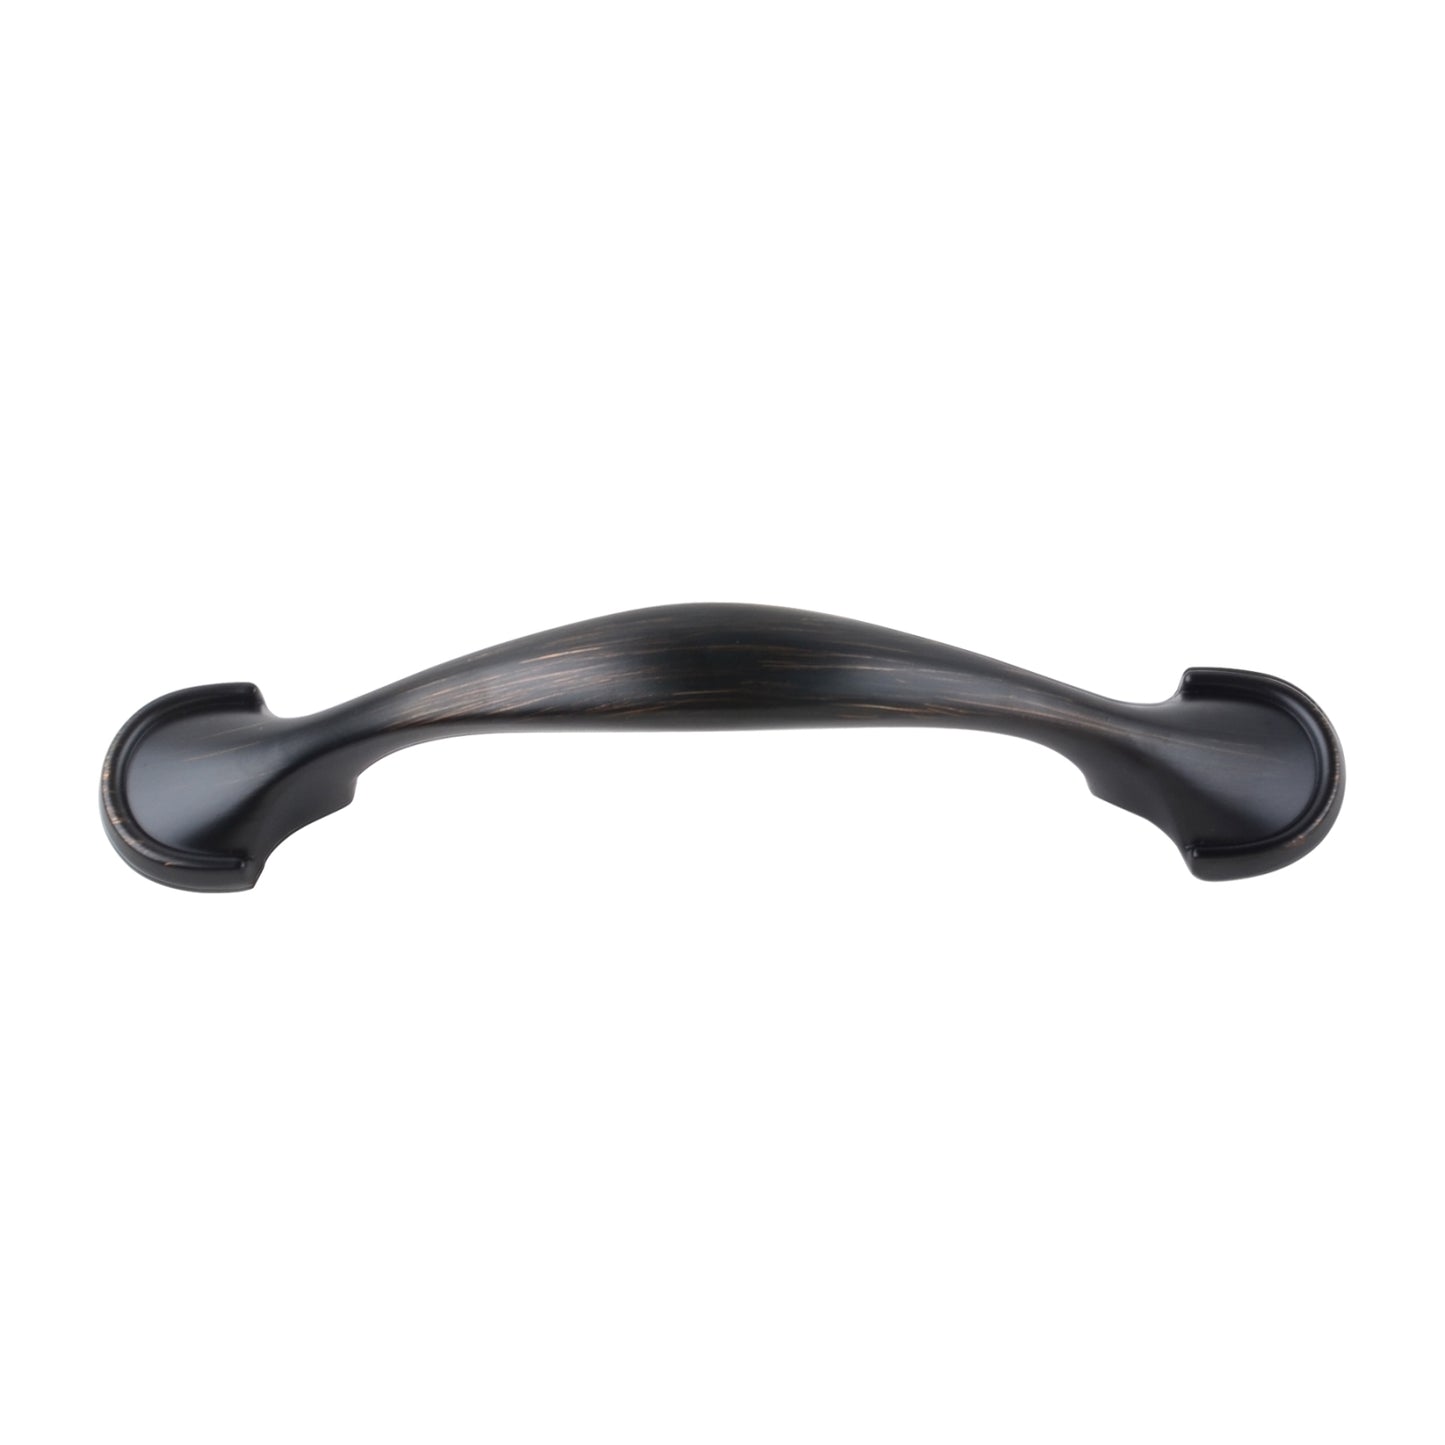 South Main Hardware Traditional Round-Foot Cabinet Handle, 4.67" Length (3" Hole Center)